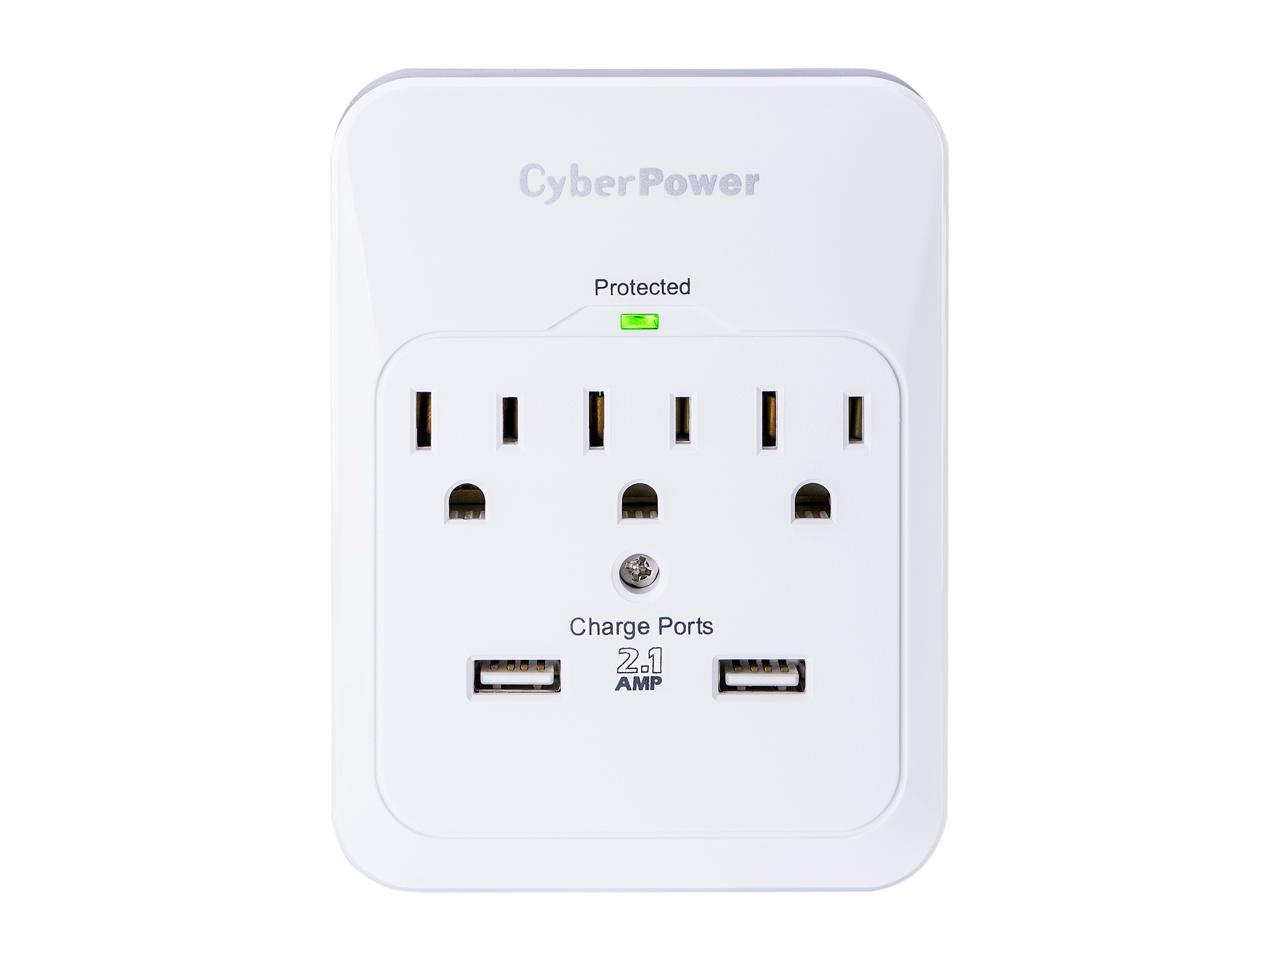 CyberPower CSP300WUR1 Surge Protector 3-AC Outlet with 2 USB Charging Ports